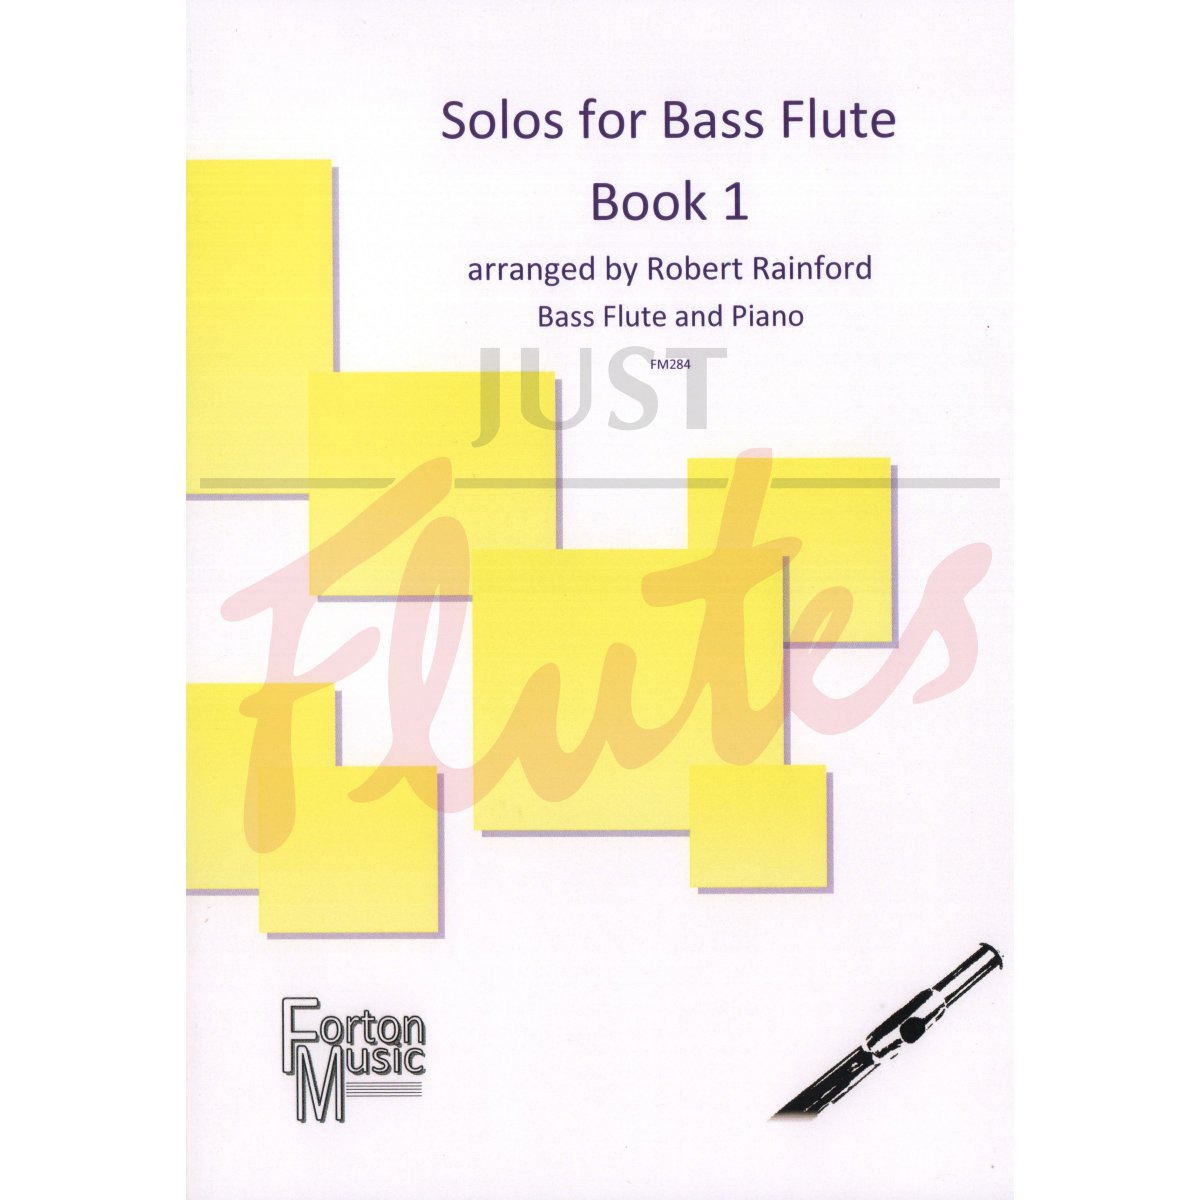 Solos for Bass Flute Book 1 with Piano Accompaniment